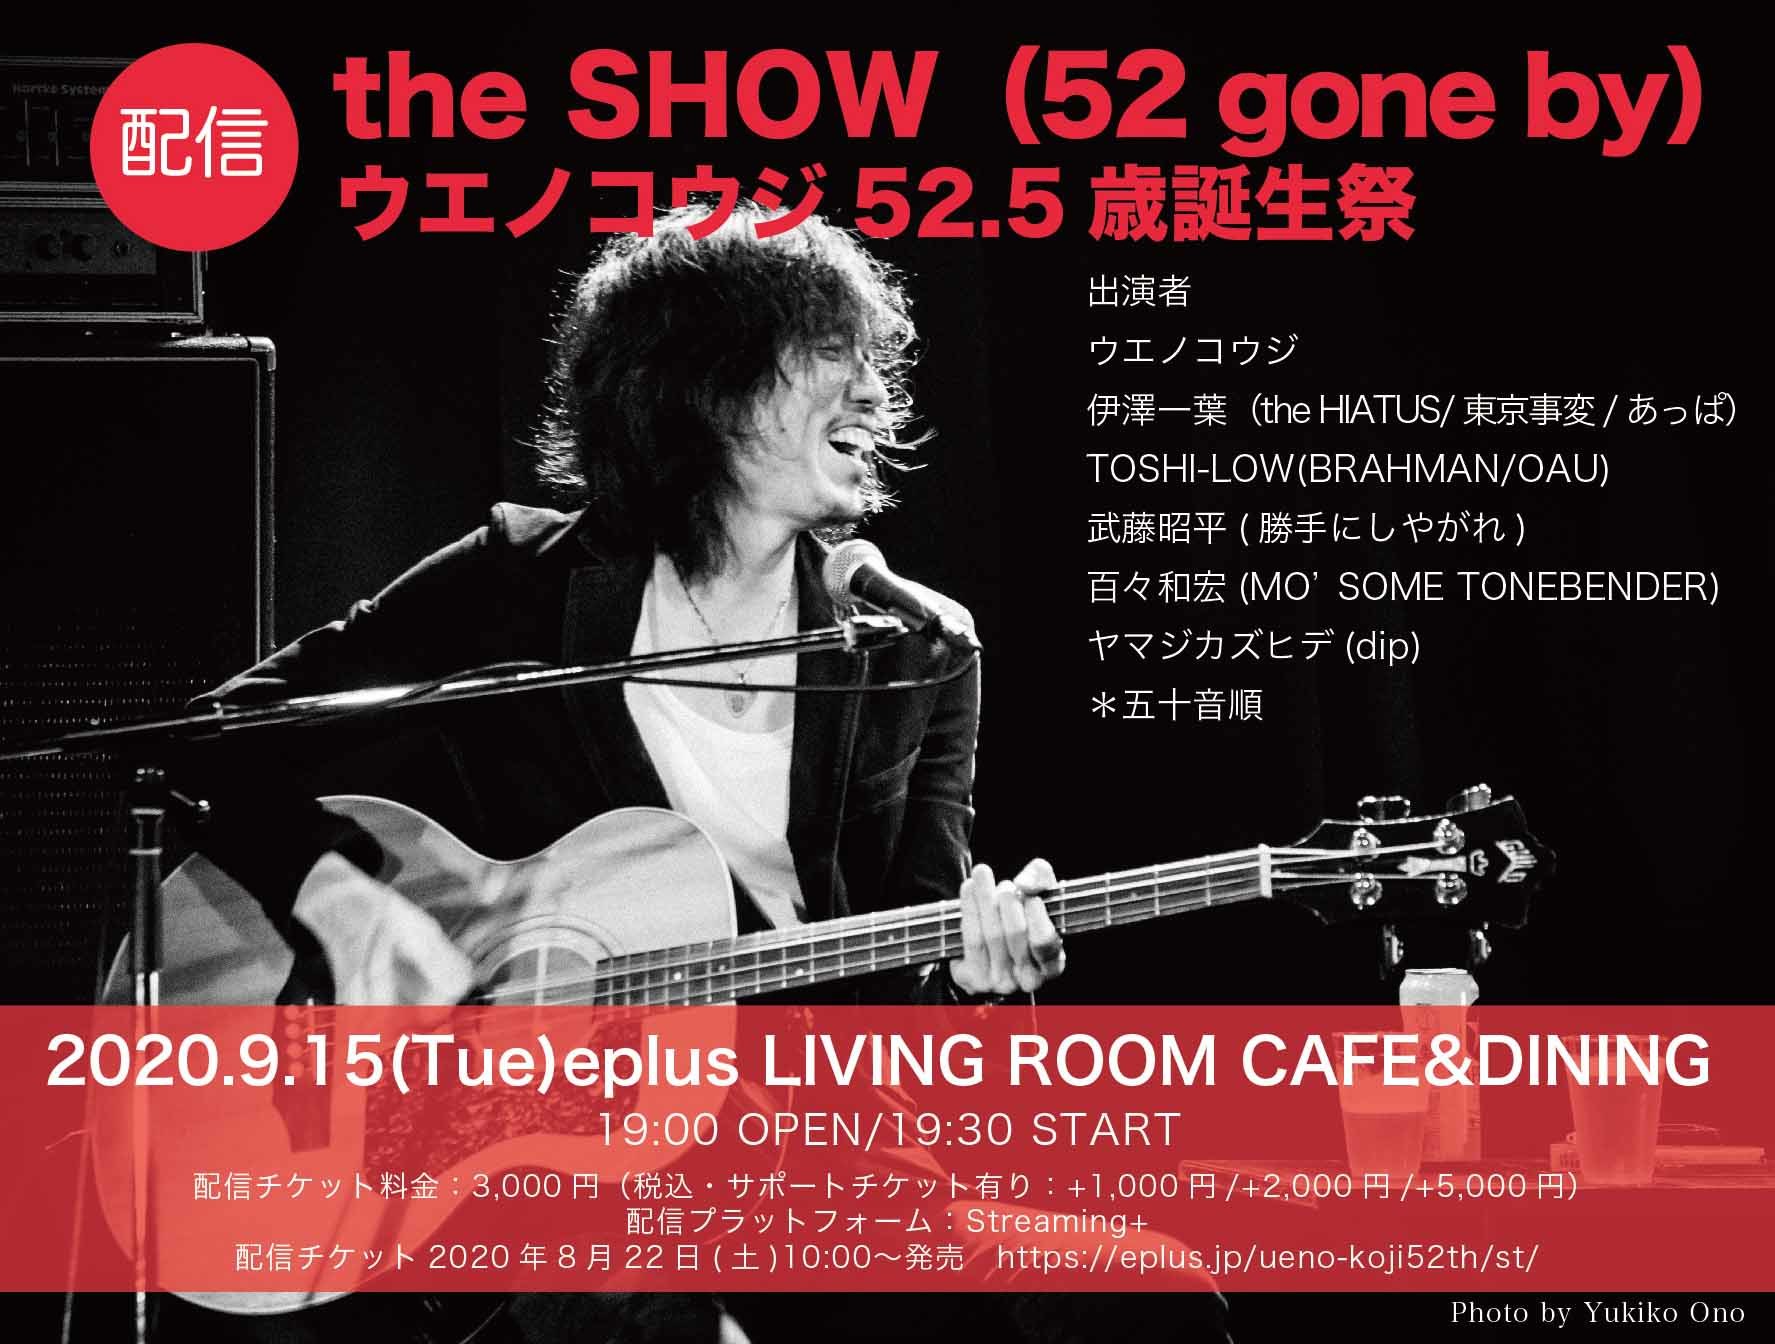 『the SHOW (gone by 52) ウエノコウジ52.5歳誕生祭』